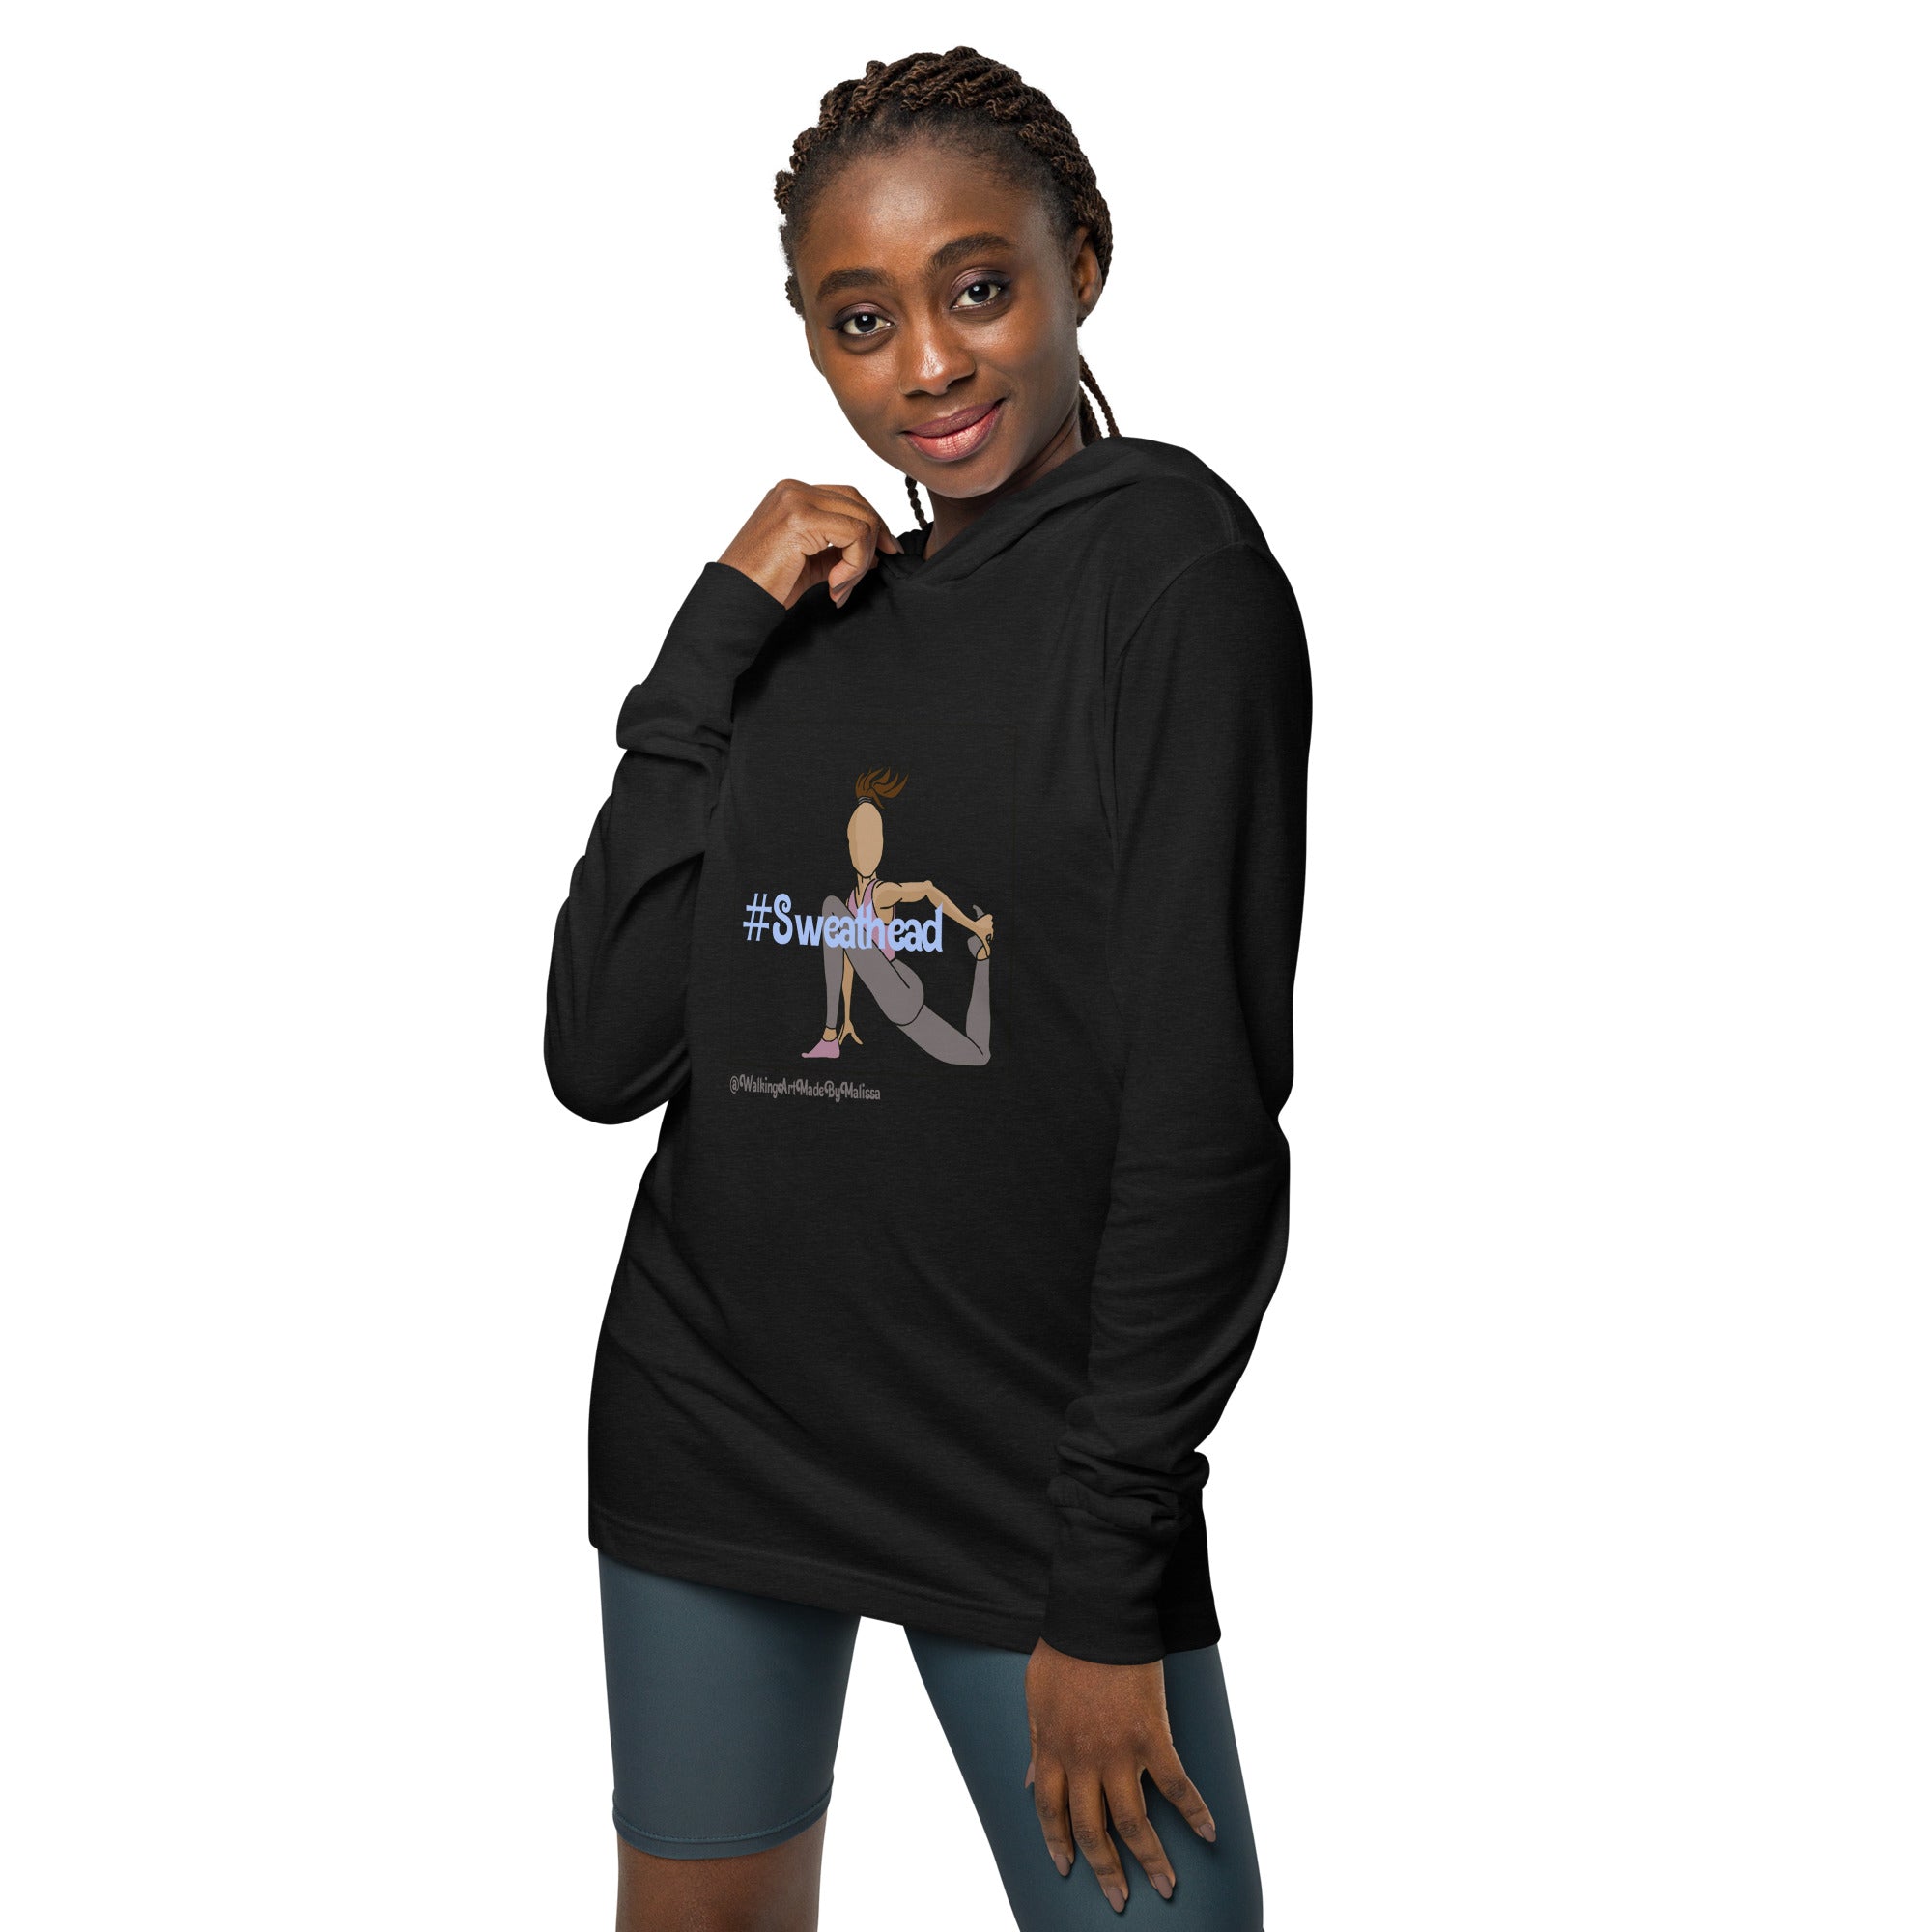 Grounded Quad Stretch Dark Color Hooded Long-sleeve Tee